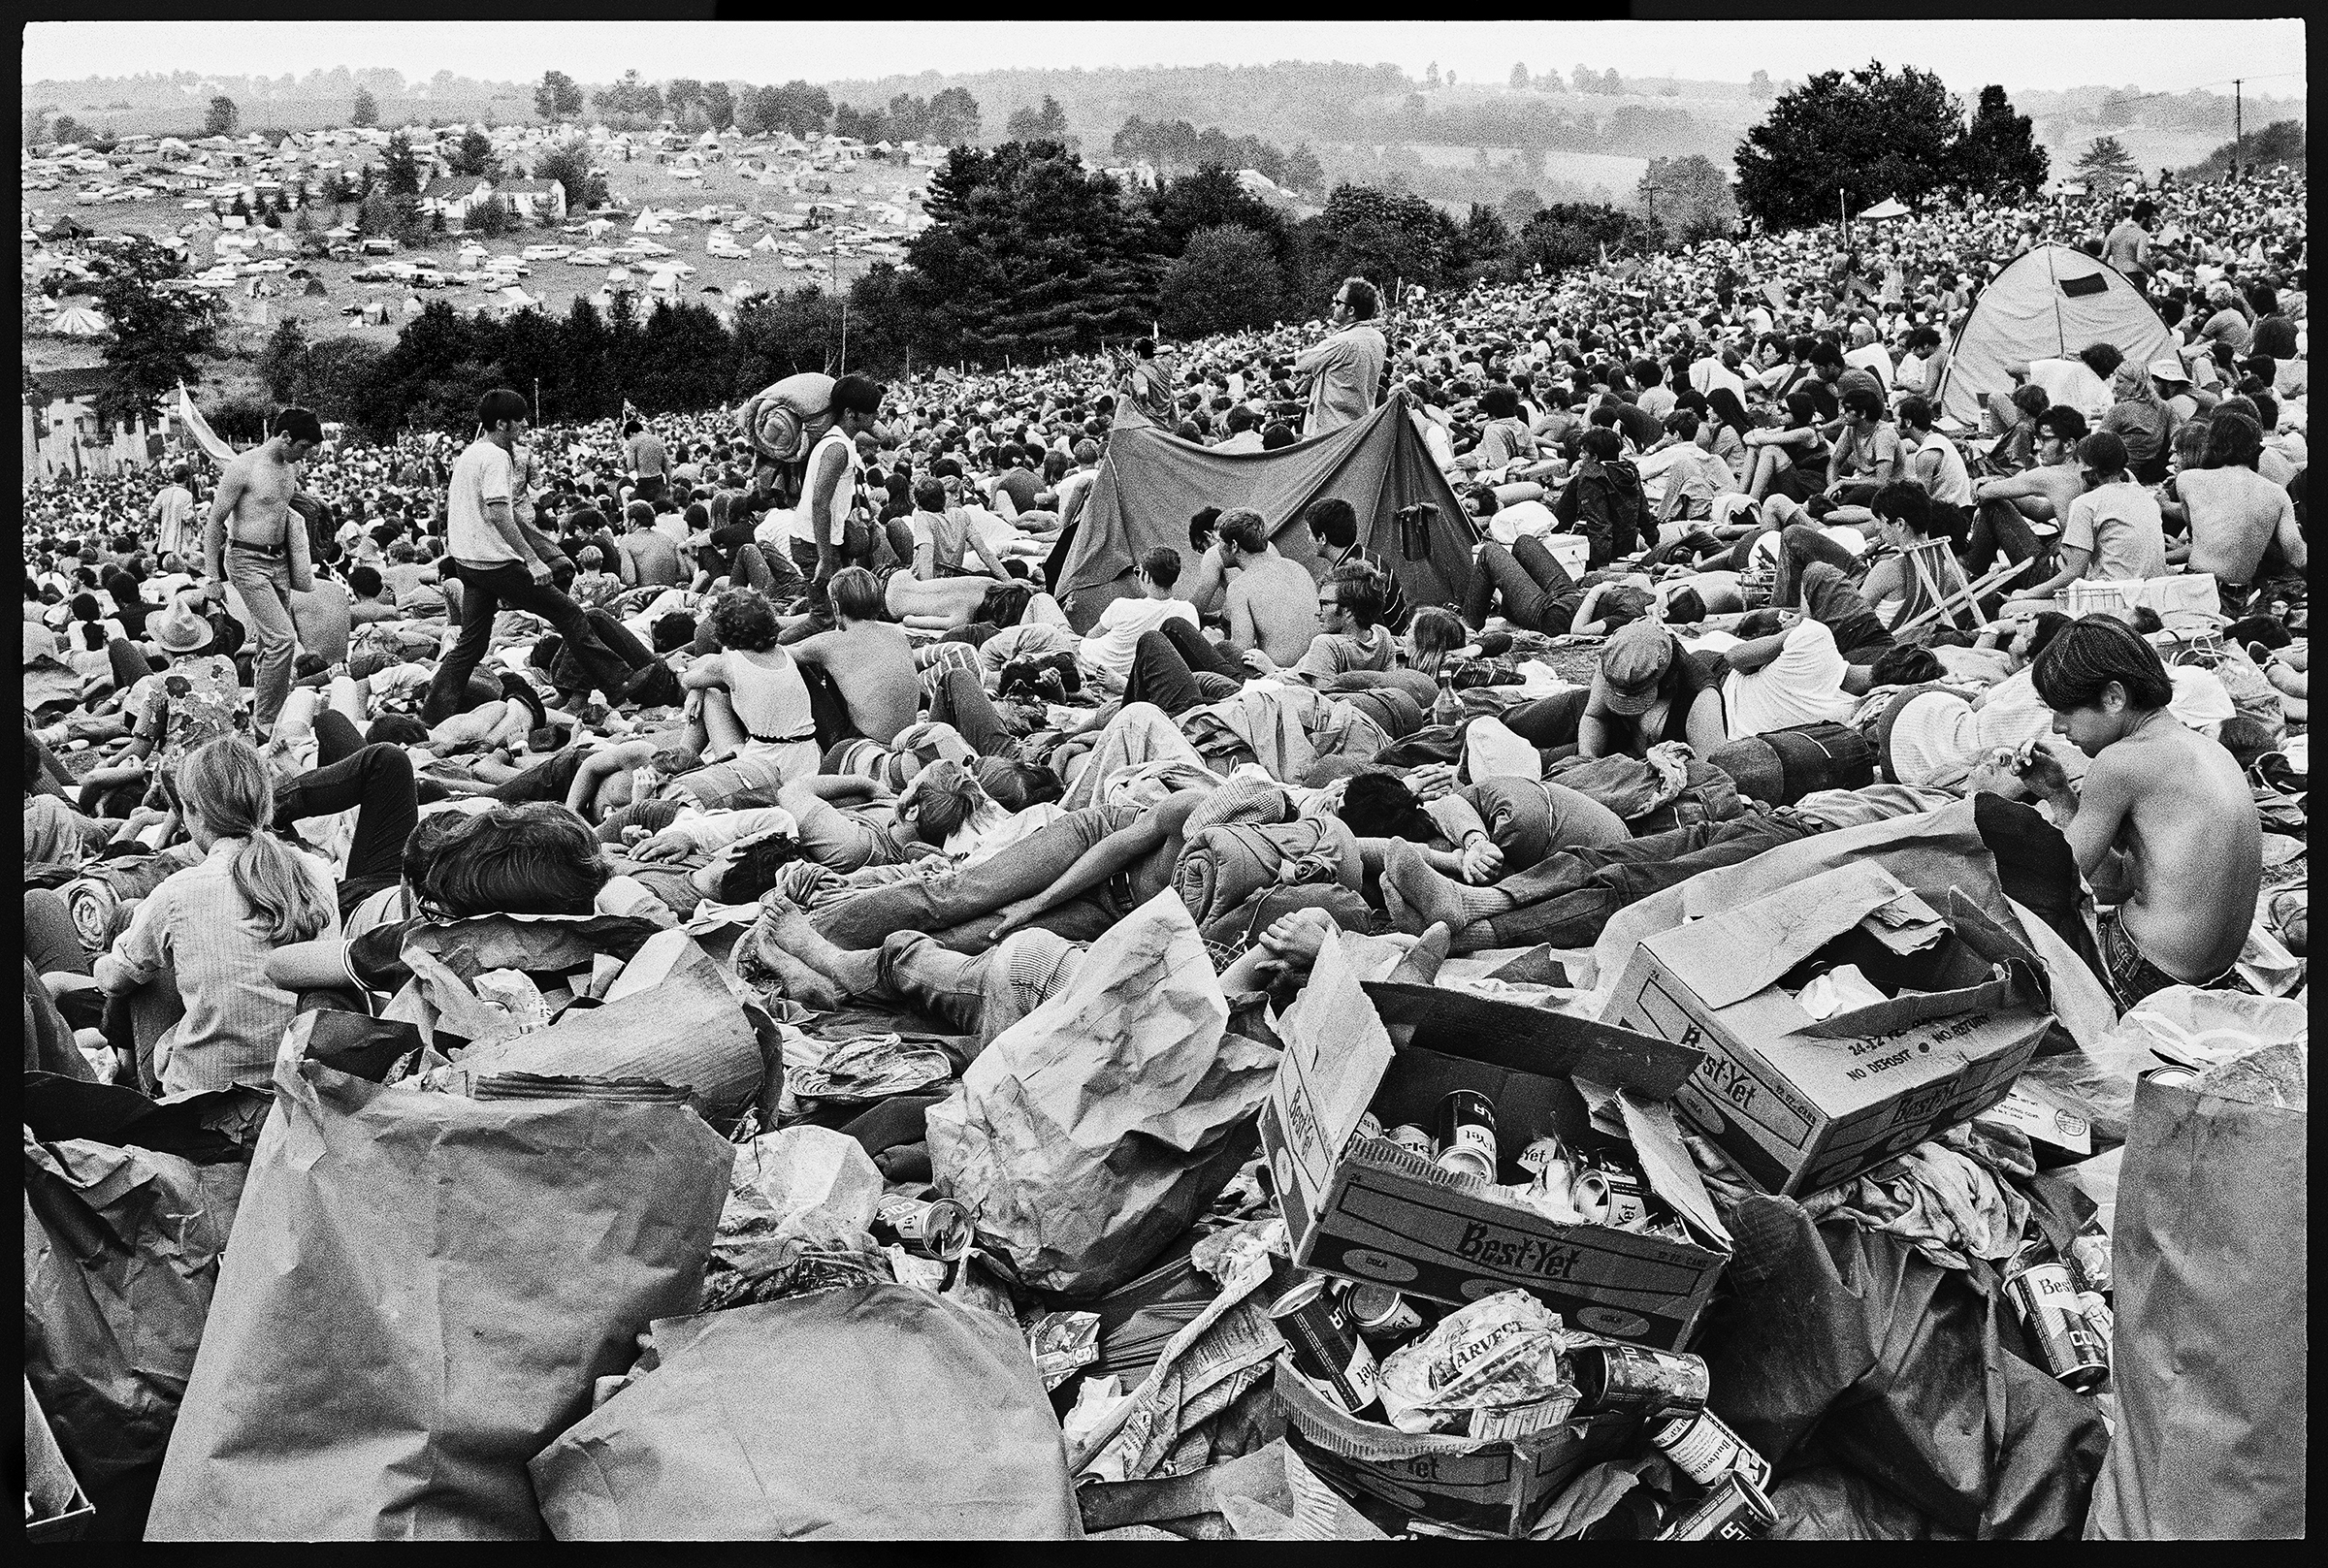 A crowd on the hillside at Woodstock. (Burk Uzzle)